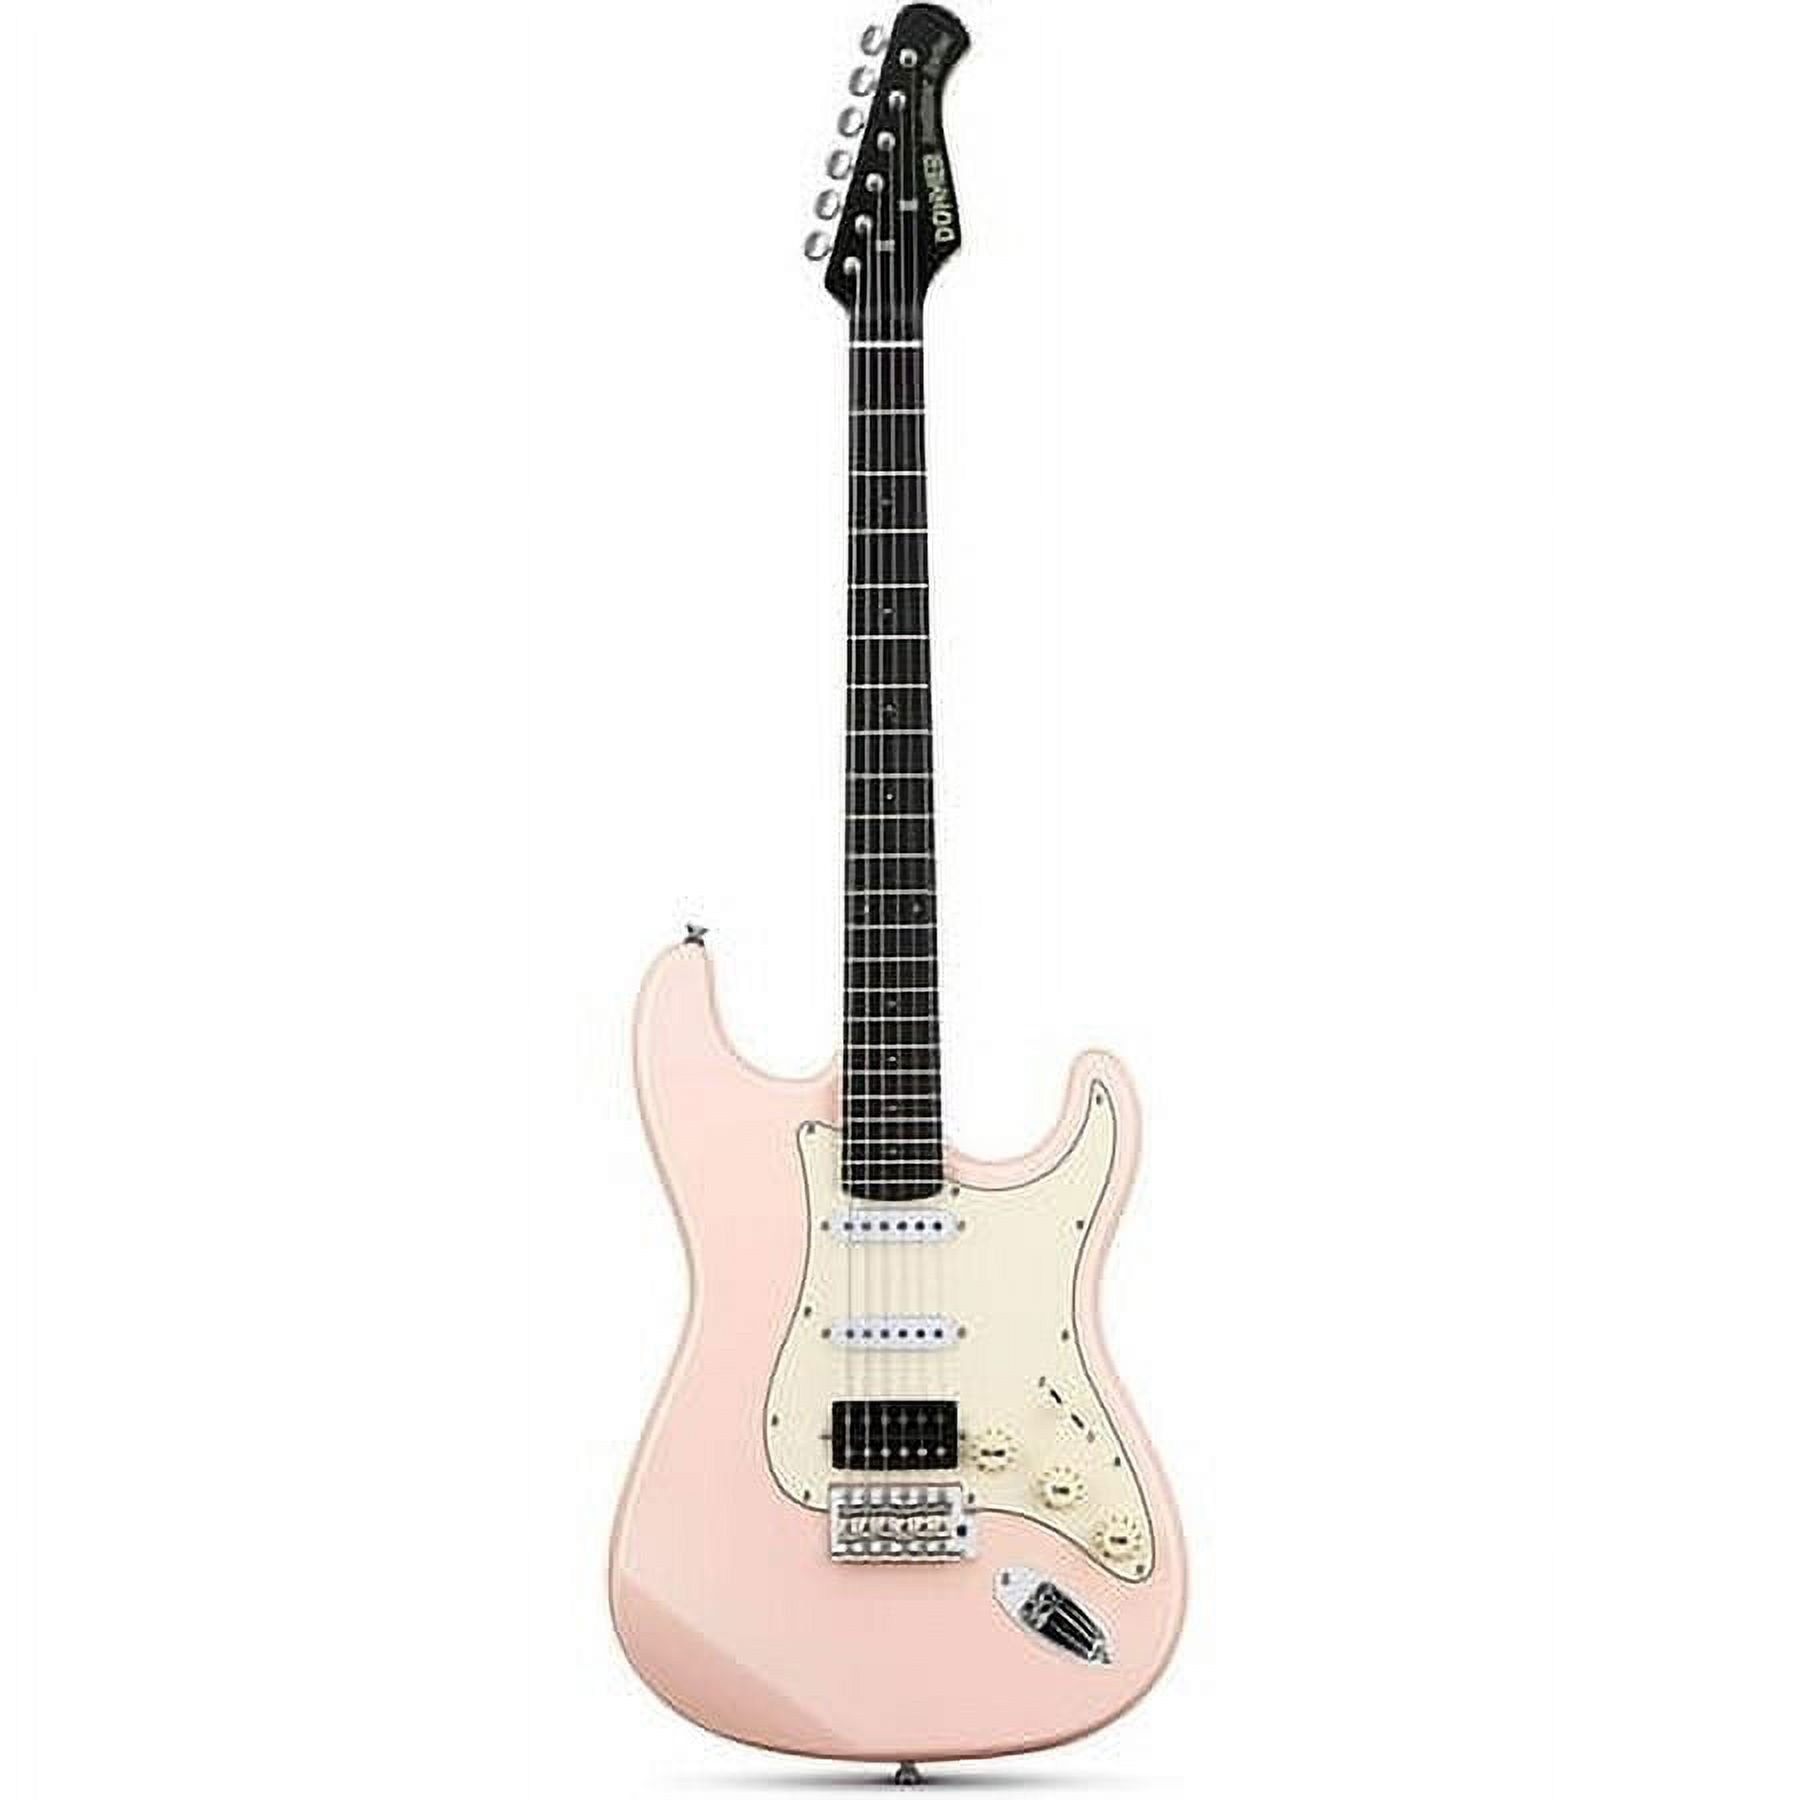 Donner 39 Inch Electric Guitar, Designer Series DST-200 Stylish Solid Body Electric Guitar for Beginner Intermediate & Pro Players, Single Coil Split System, Bonus Bag, Cable, Strap - image 5 of 8